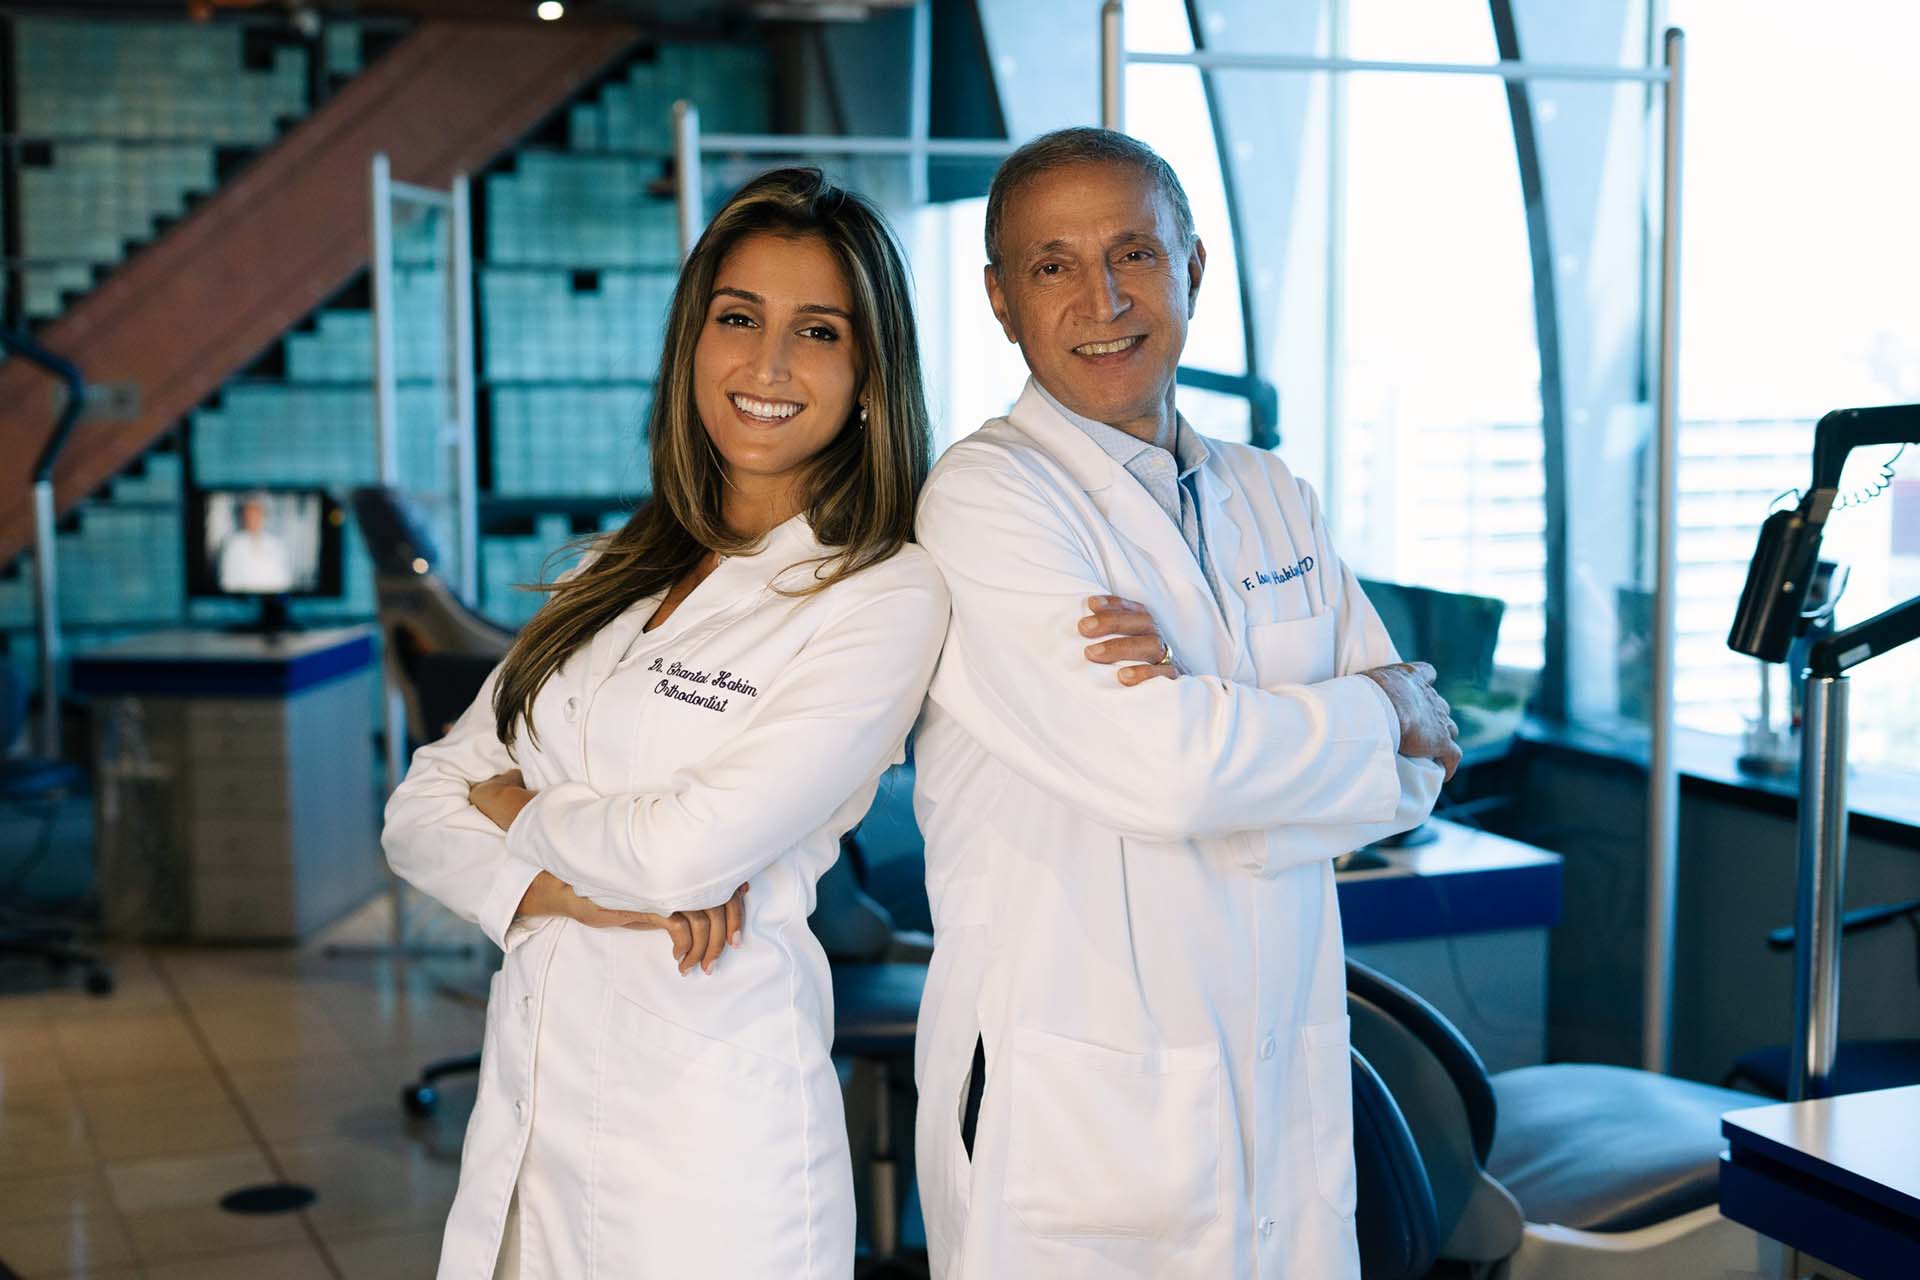 Dr. Chantal Hakim and Dr. F. Isaac Hakim at the Orthospaceship in Los Angeles, a Southern California orthodontic practice serving Los Angeles.